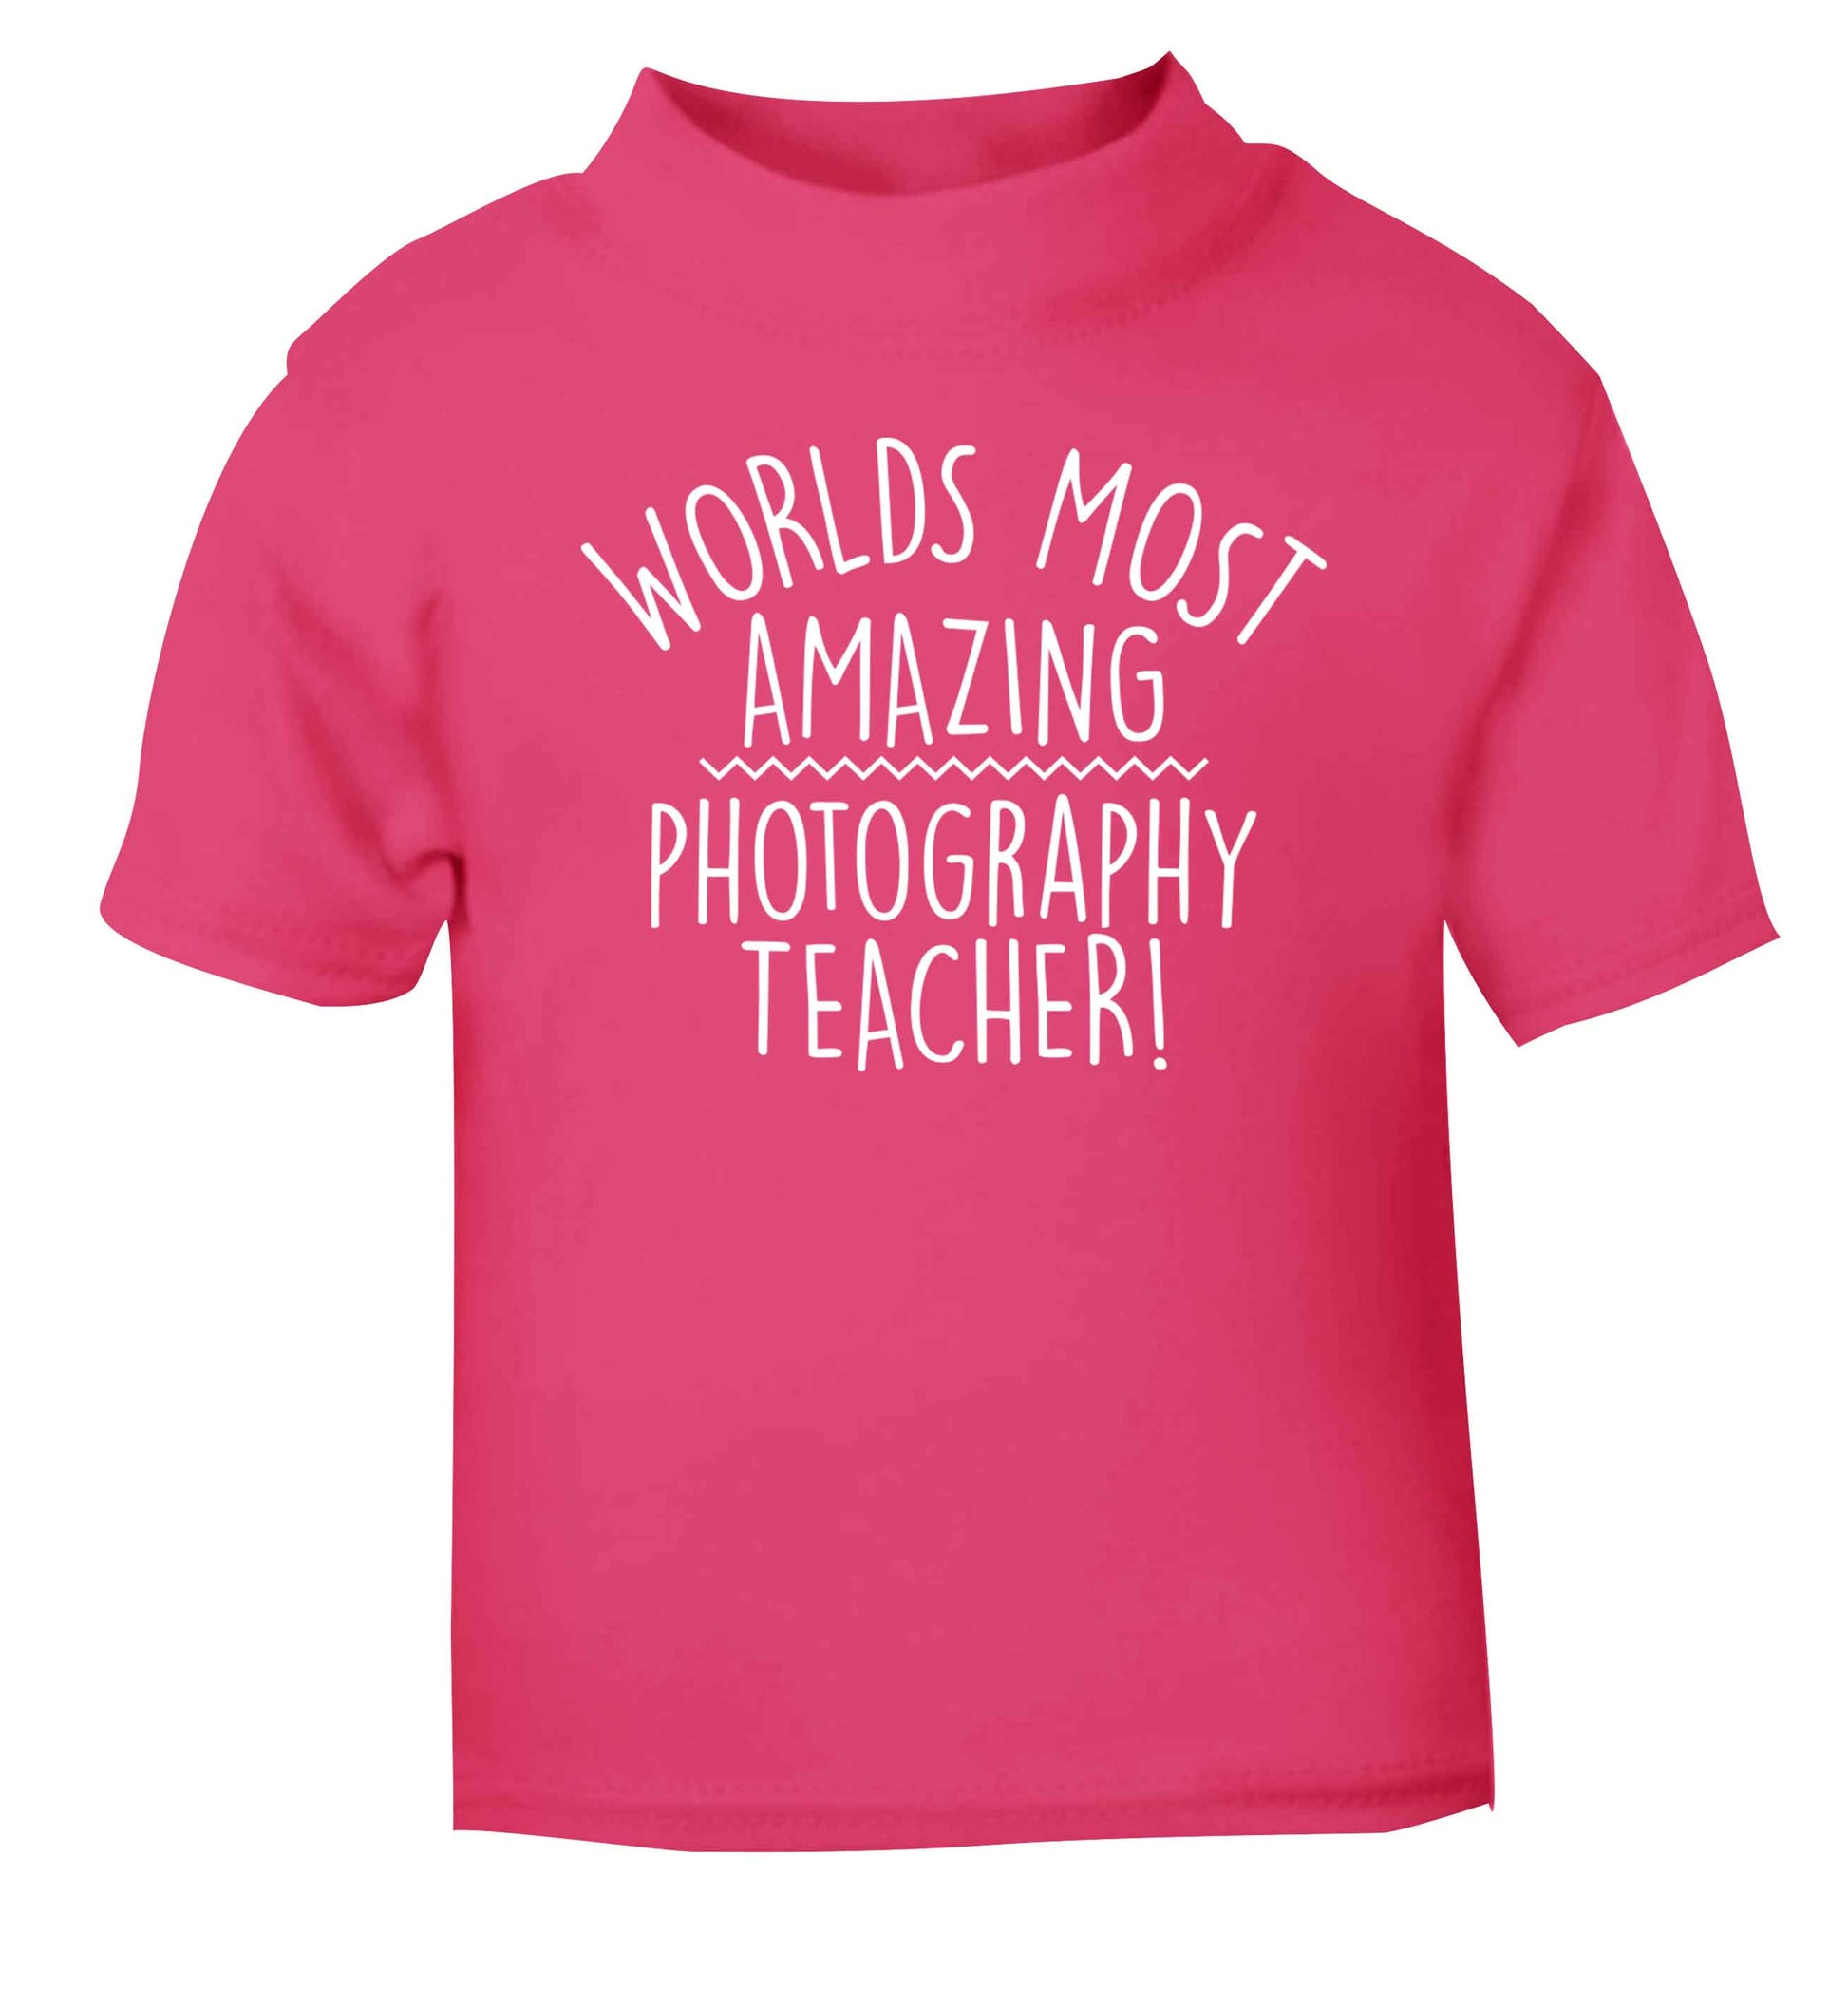 Worlds most amazing photography teacher pink baby toddler Tshirt 2 Years